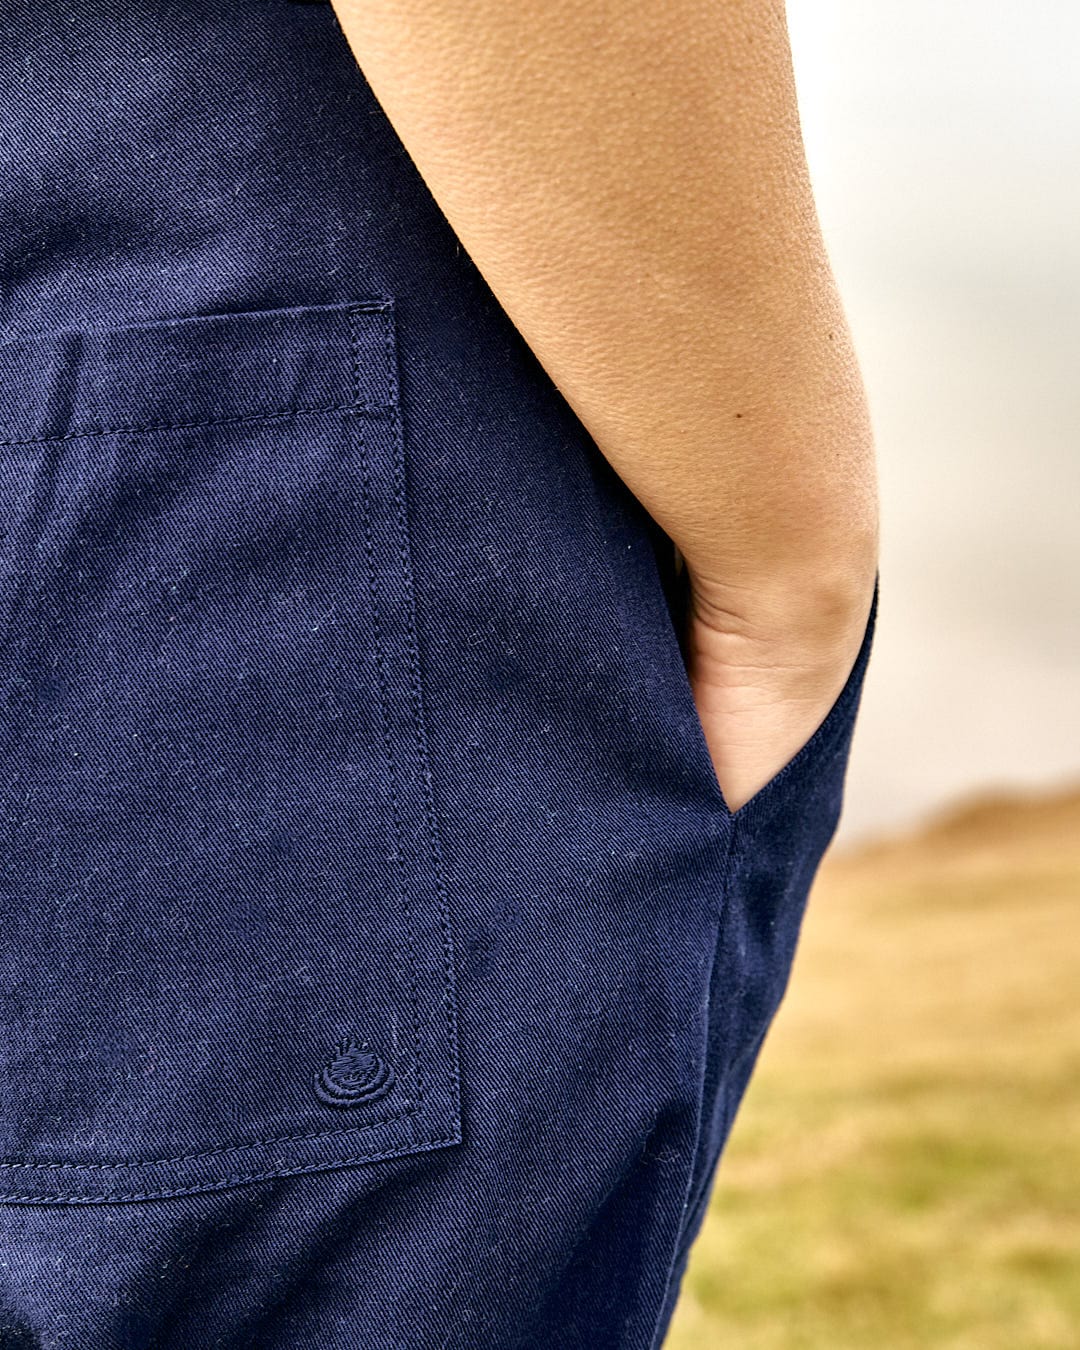 The back pocket of a person's Saltrock Hilda - Womens Canvas Trouser - Dark Blue pants.